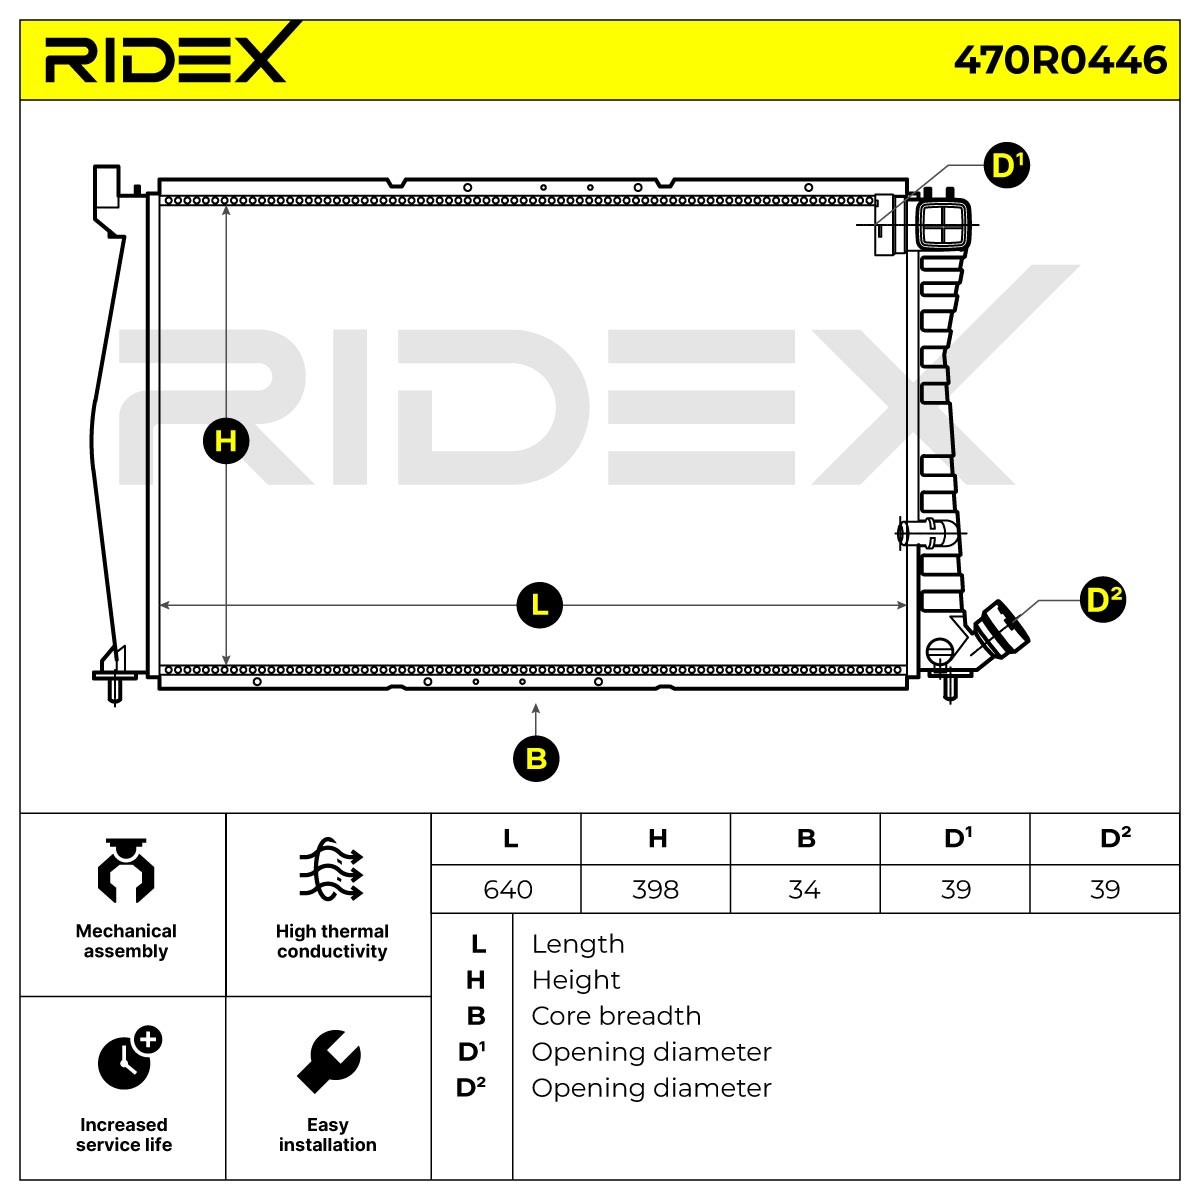 470R0446 Radiator 470R0446 RIDEX Aluminium, for vehicles with/without air conditioning, Brazed cooling fins